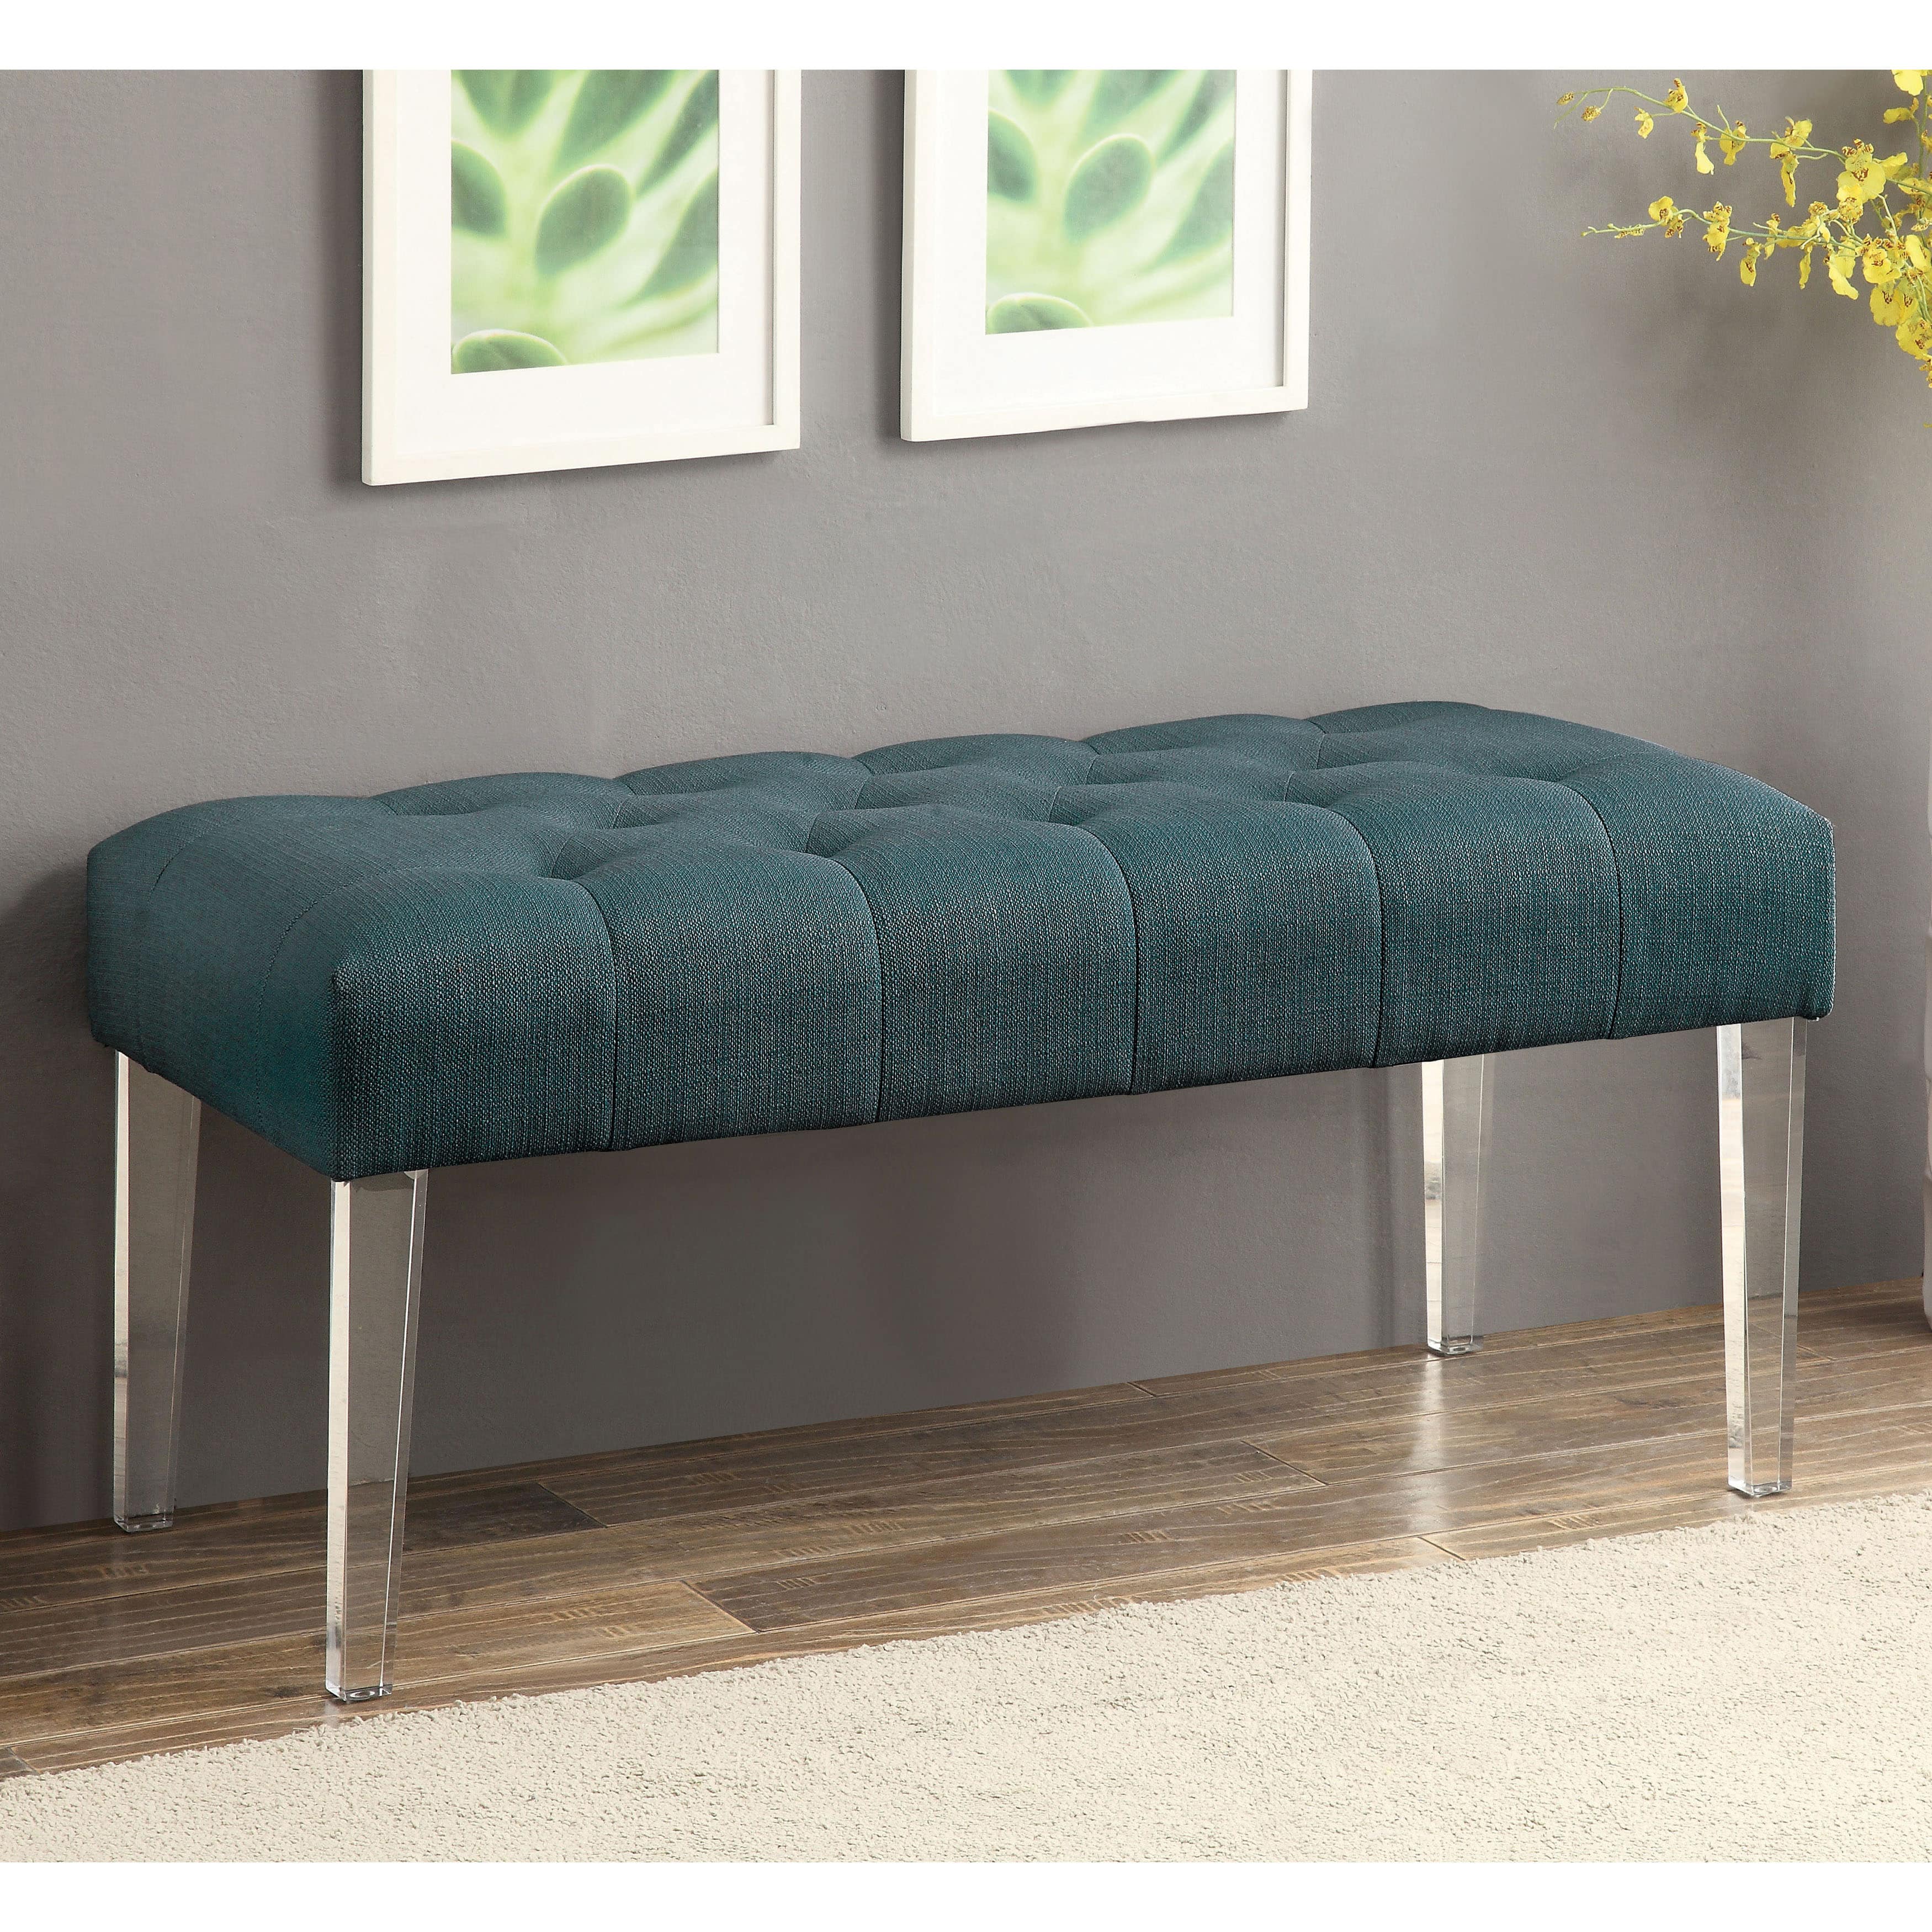 Teal-bench-with-acrylic-legs